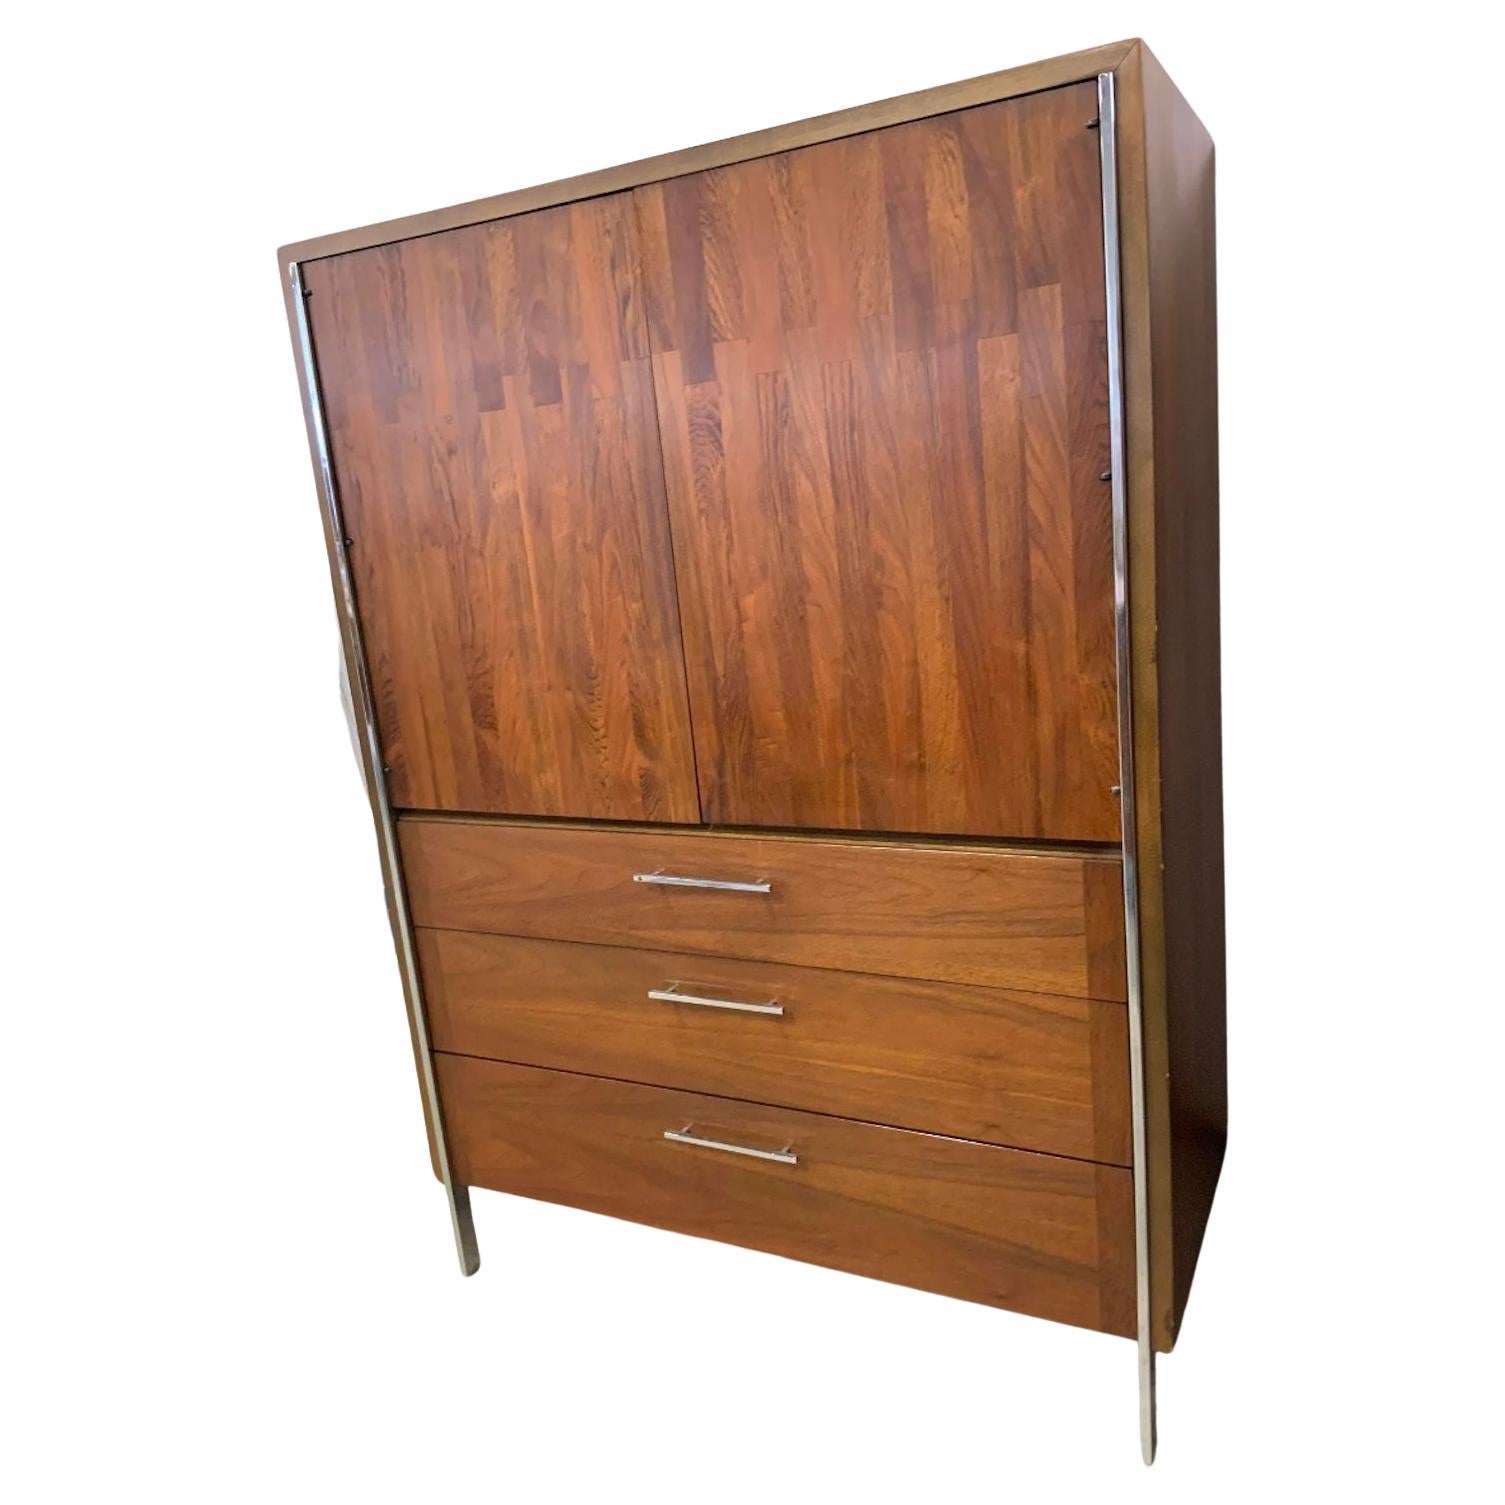 Rare Mid-Century Modern Lane patchwork walnut and rosewood Wardrobe dresser Armoire circa 1970s well built. Has 2 center front cabinet doors with 2 Interior drawers behind them. Has exterior 3 lower drawers with lots of storage. Sits on flat bar